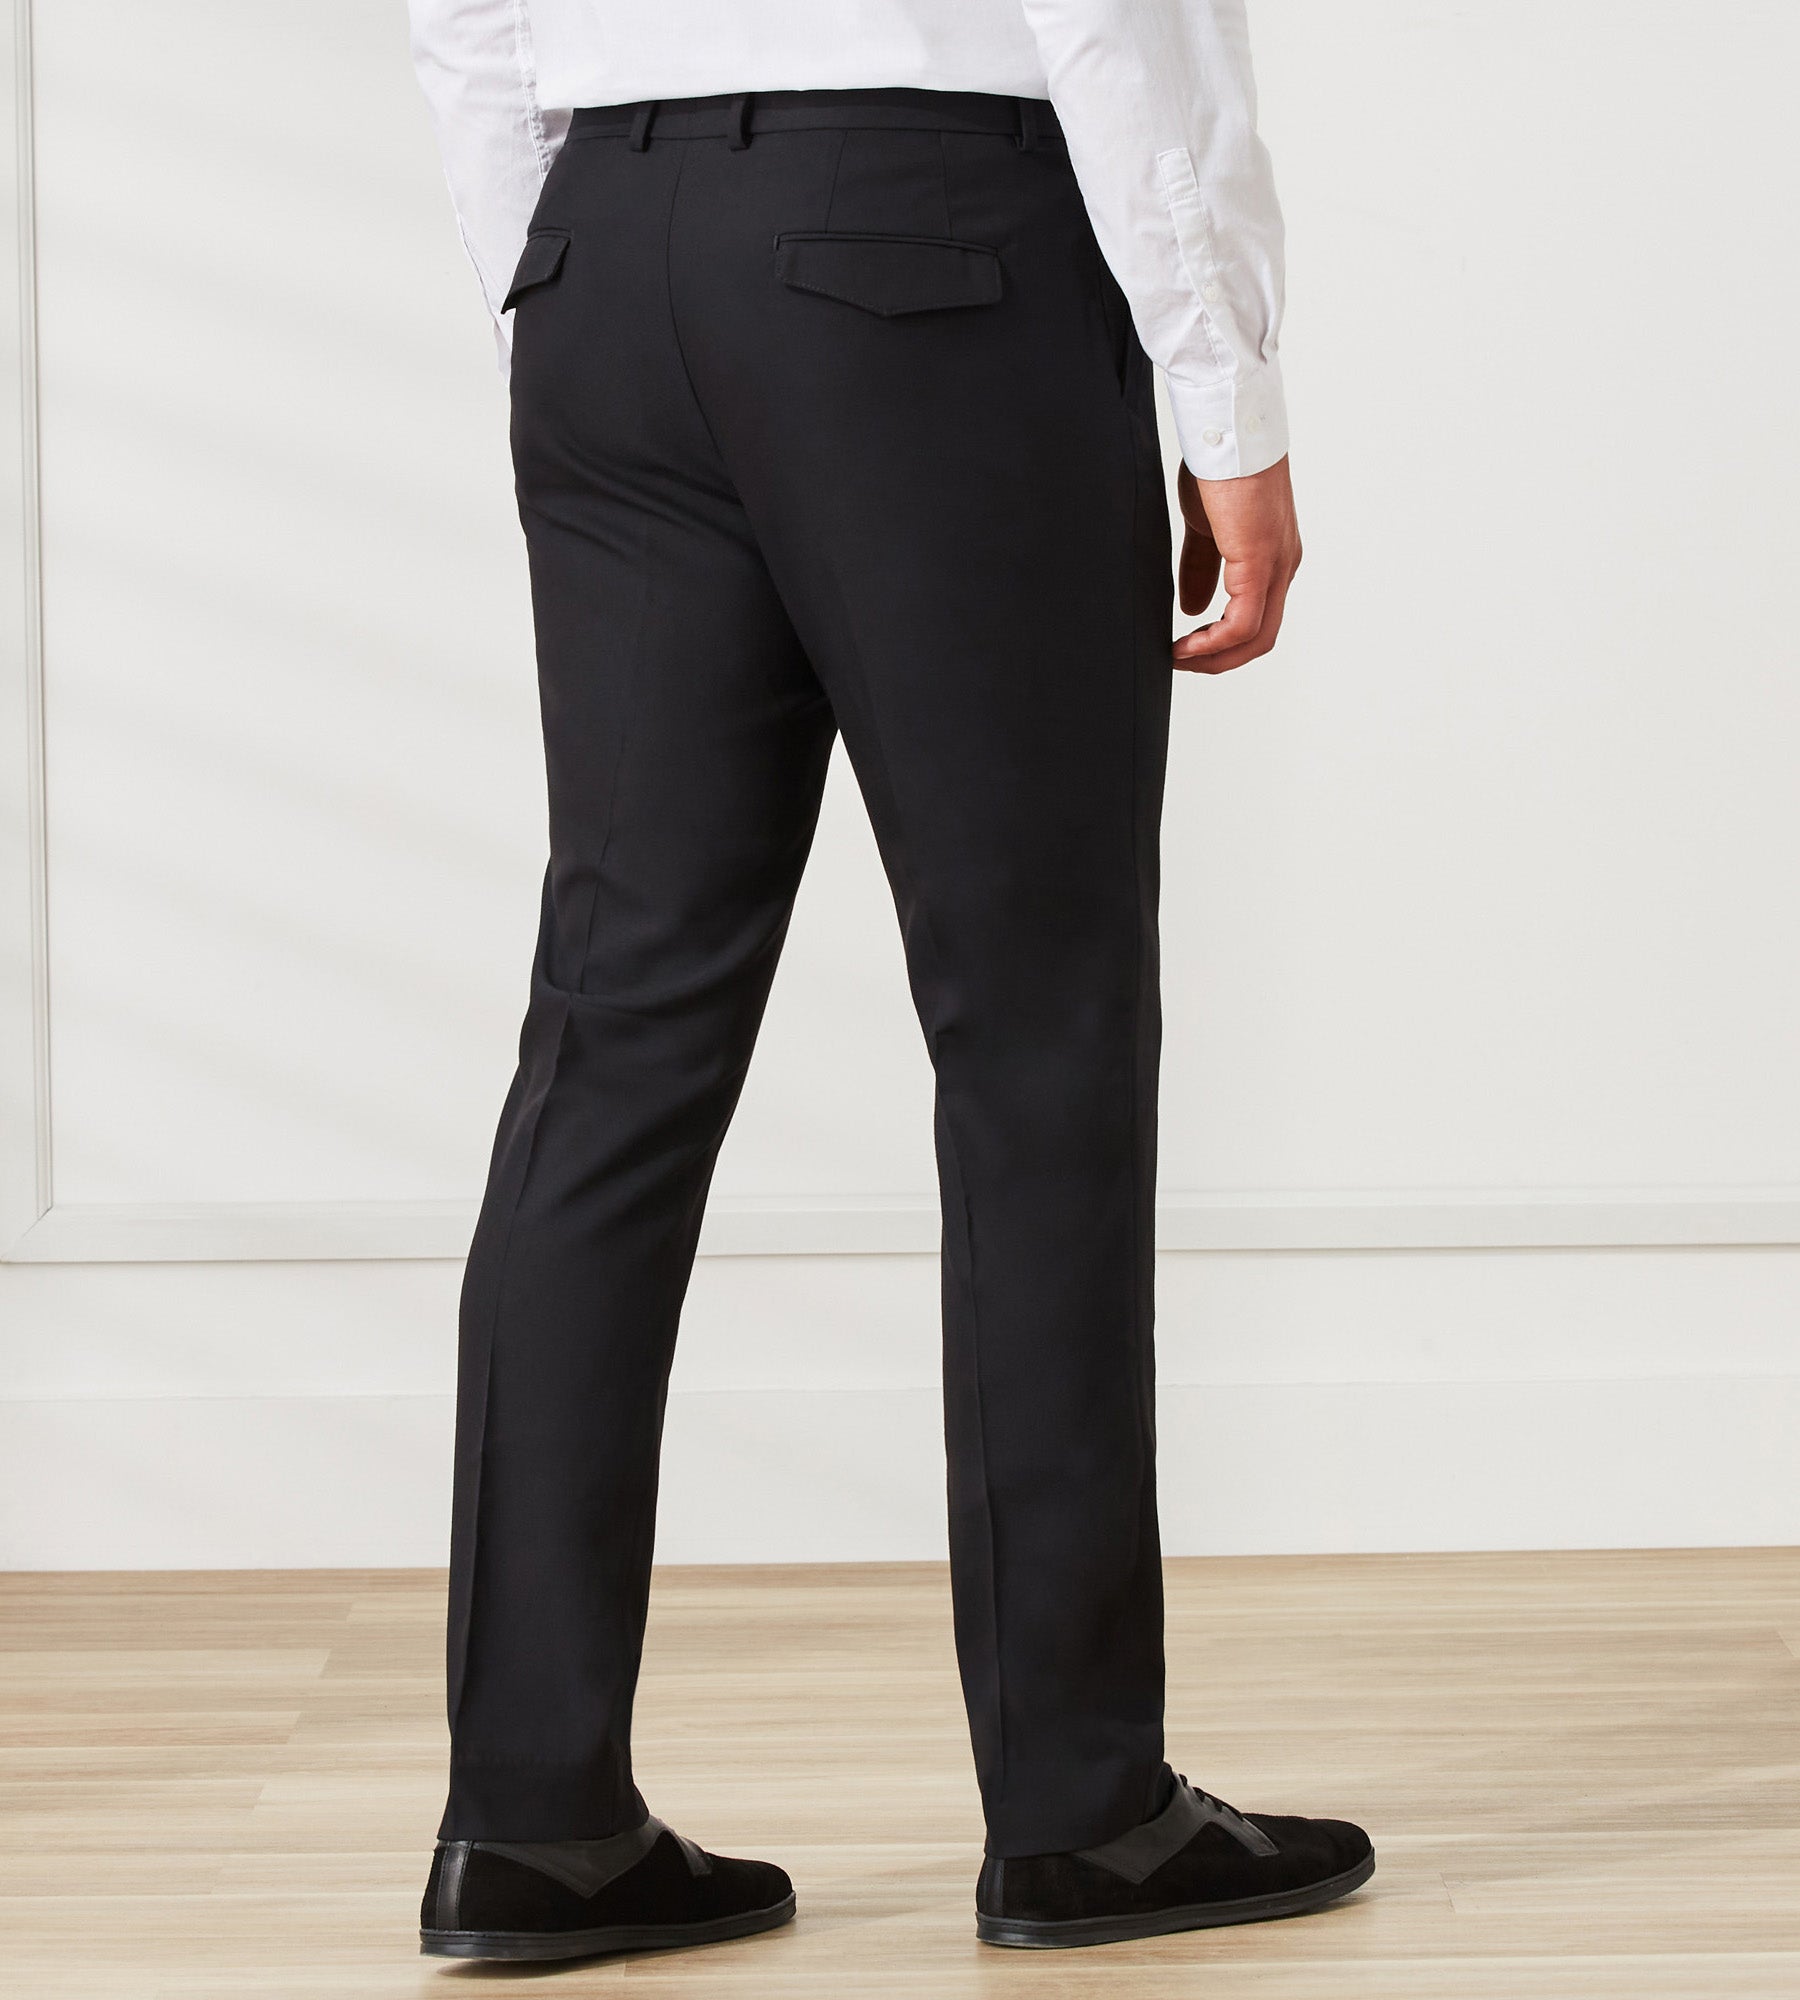 Tommp Slim Stretch Tailored Pant - Black - Tommp Slim Stretch Tailored Pant, Suit Pants